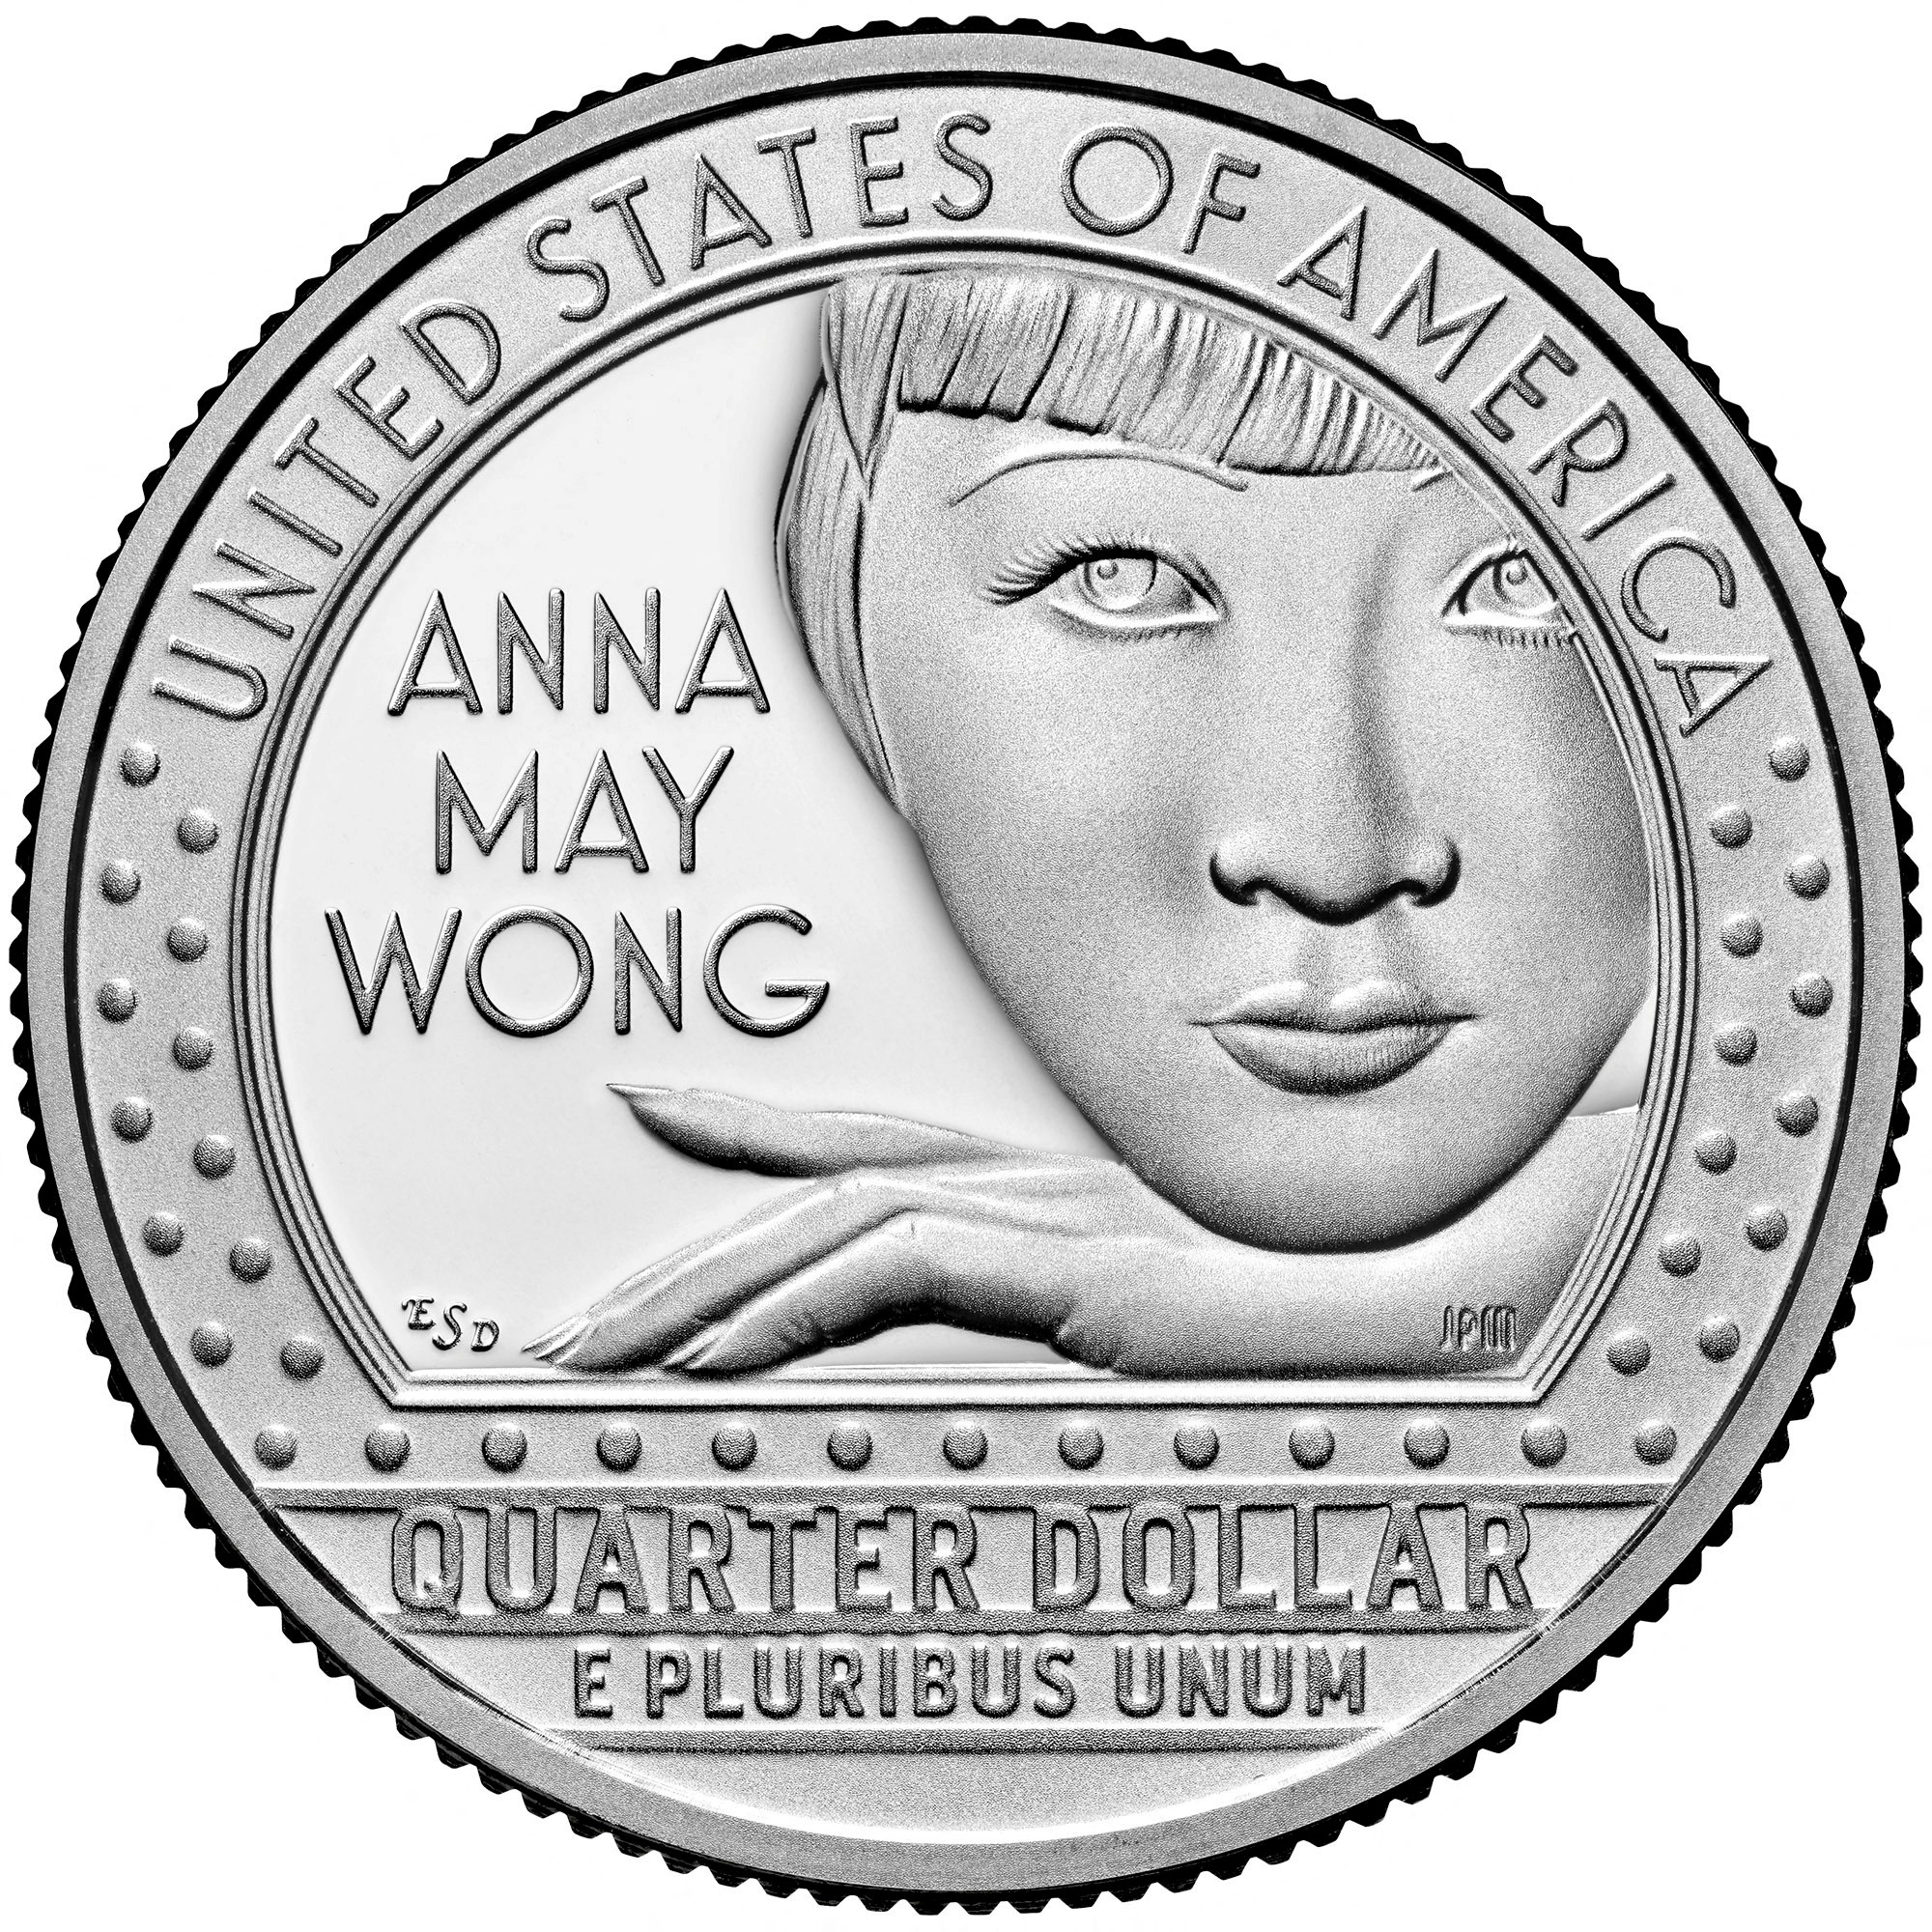 An undated proof image shows the likeness of Asian American actress Anna May Wong